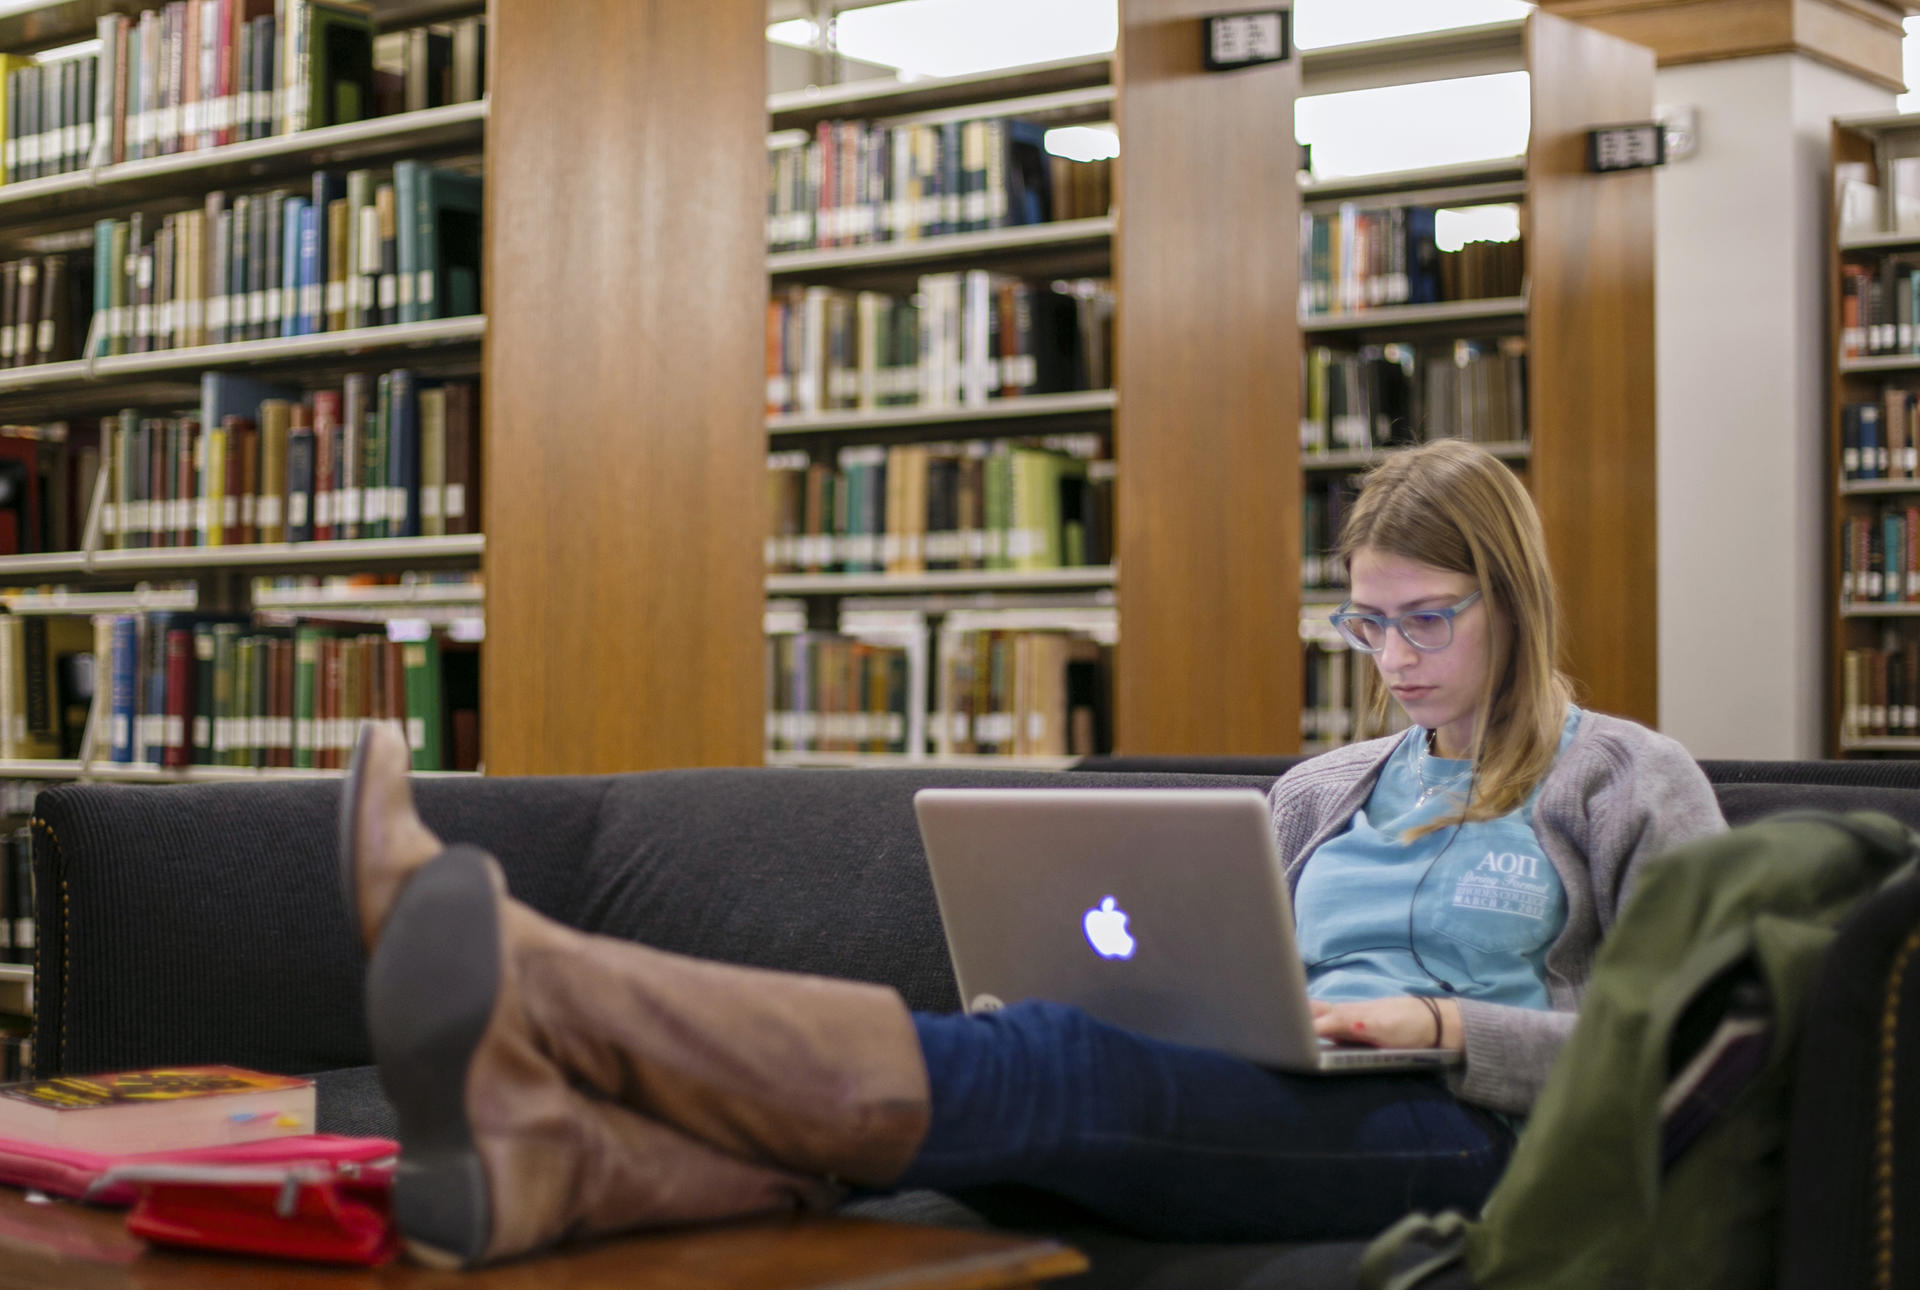 A female student sits with her feet propped up on the table in the library, staring at her laptop screen.